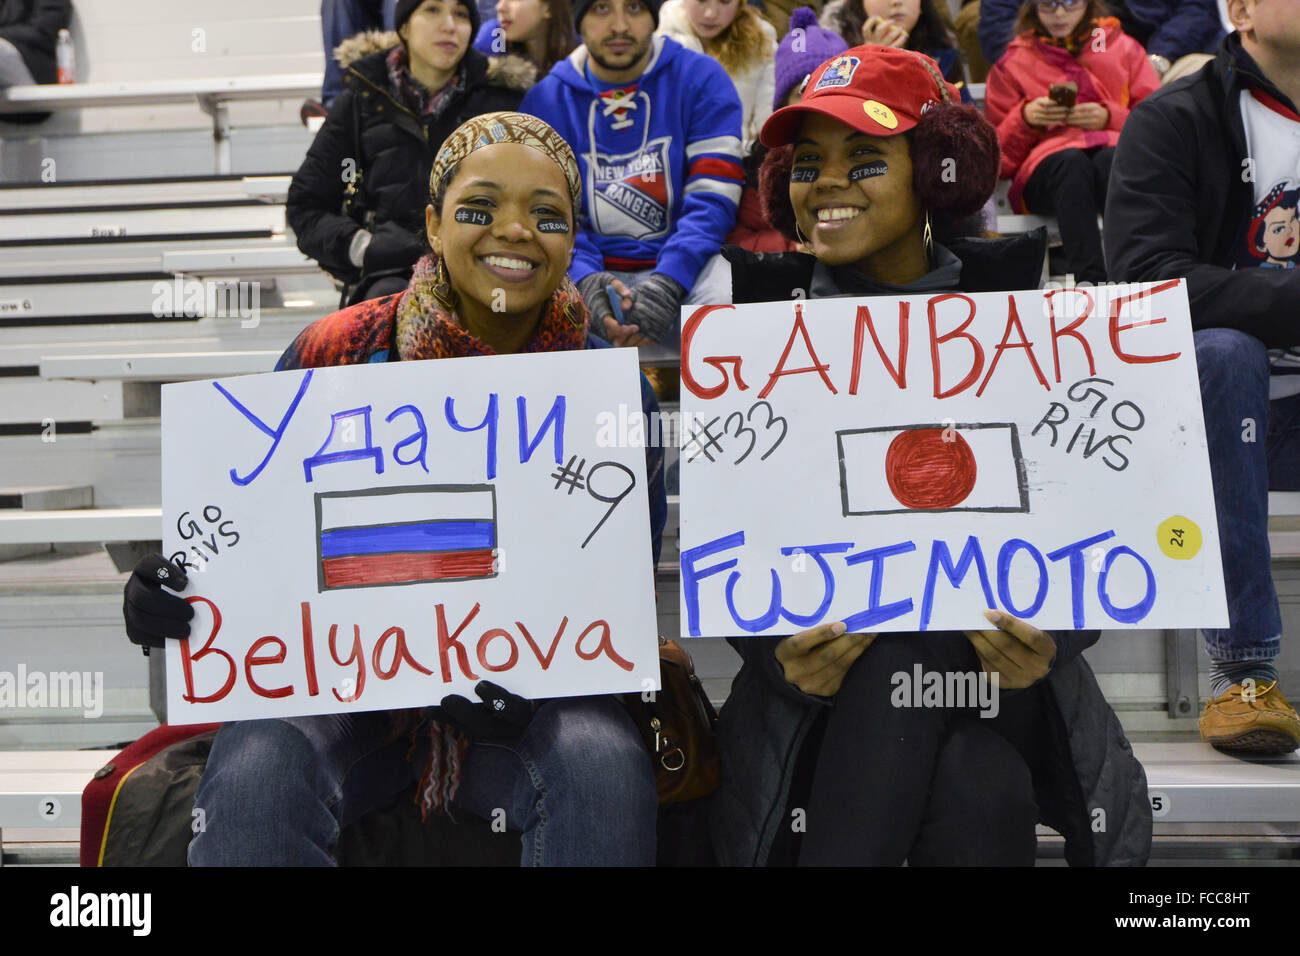 Brooklyn, New York, USA. 17th Jan, 2016. New York Riveters fans NWHL : NWHL (National Women's Hockey League) game between Buffalo Beauts 6-5 New York Riveters at Aviator Sports and Events Center in Brooklyn, New York, United States . © Hiroaki Yamaguchi/AFLO/Alamy Live News Stock Photo